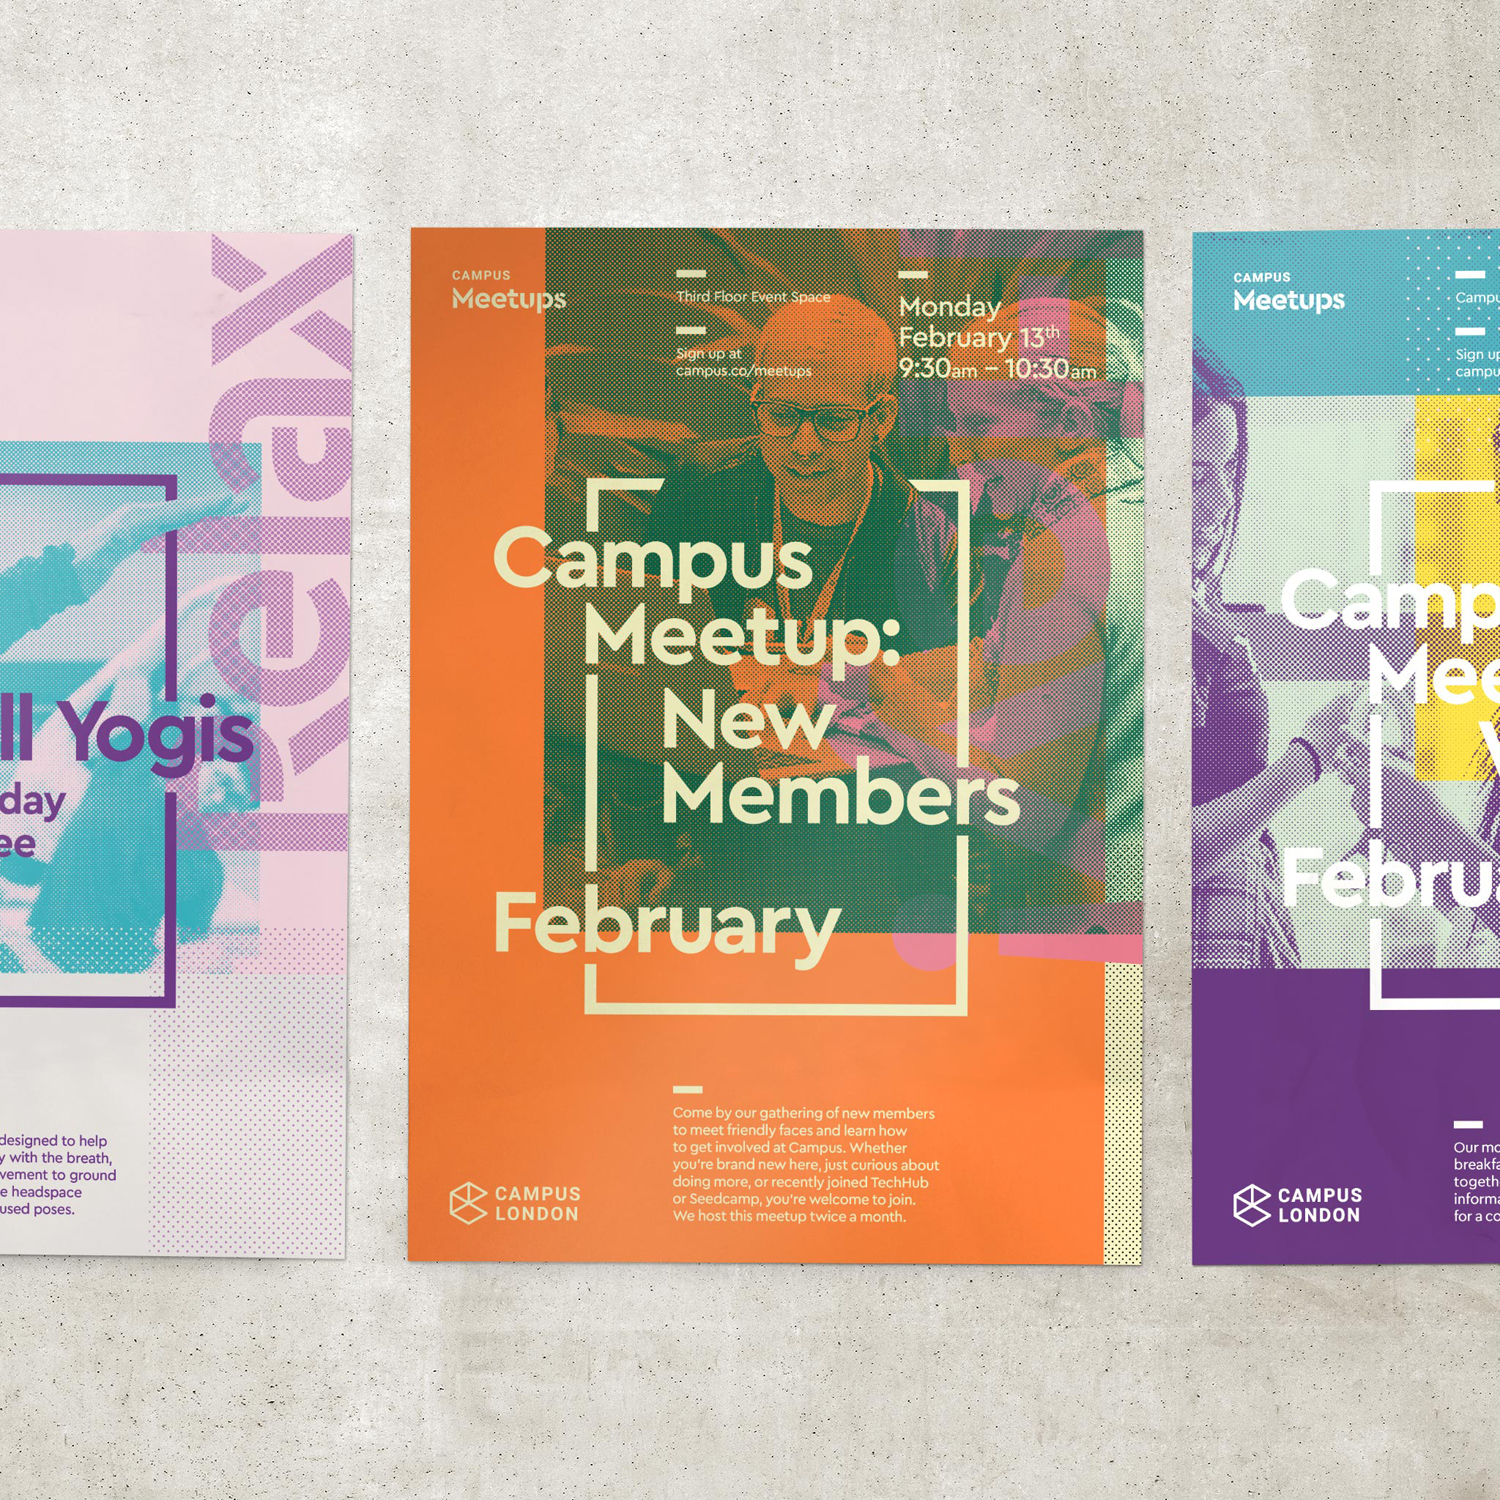 visual identity and poster design by MultiAdaptor for Google's co-working and event space concept Campus